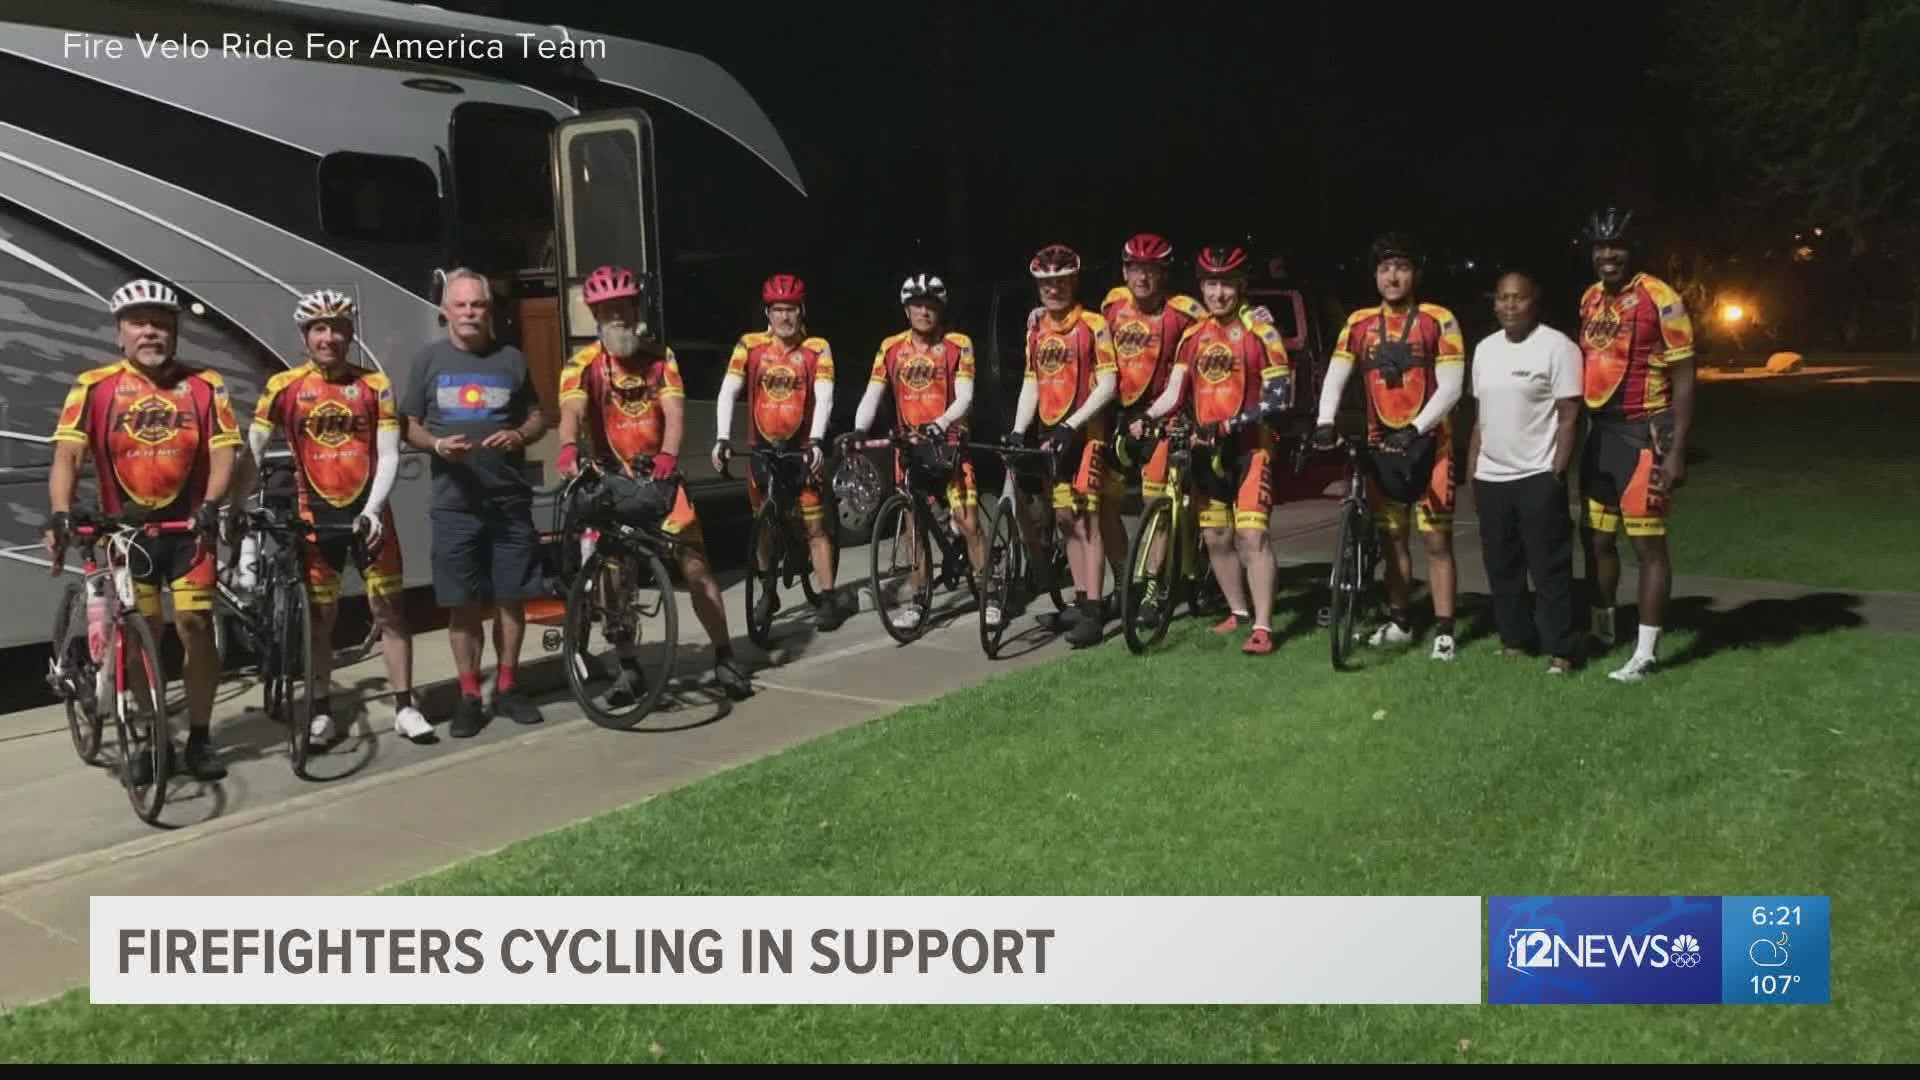 The group is fundraising for firefighter cancer awareness, firefighter mental health and severely wounded veterans as they bike 3,100 miles.